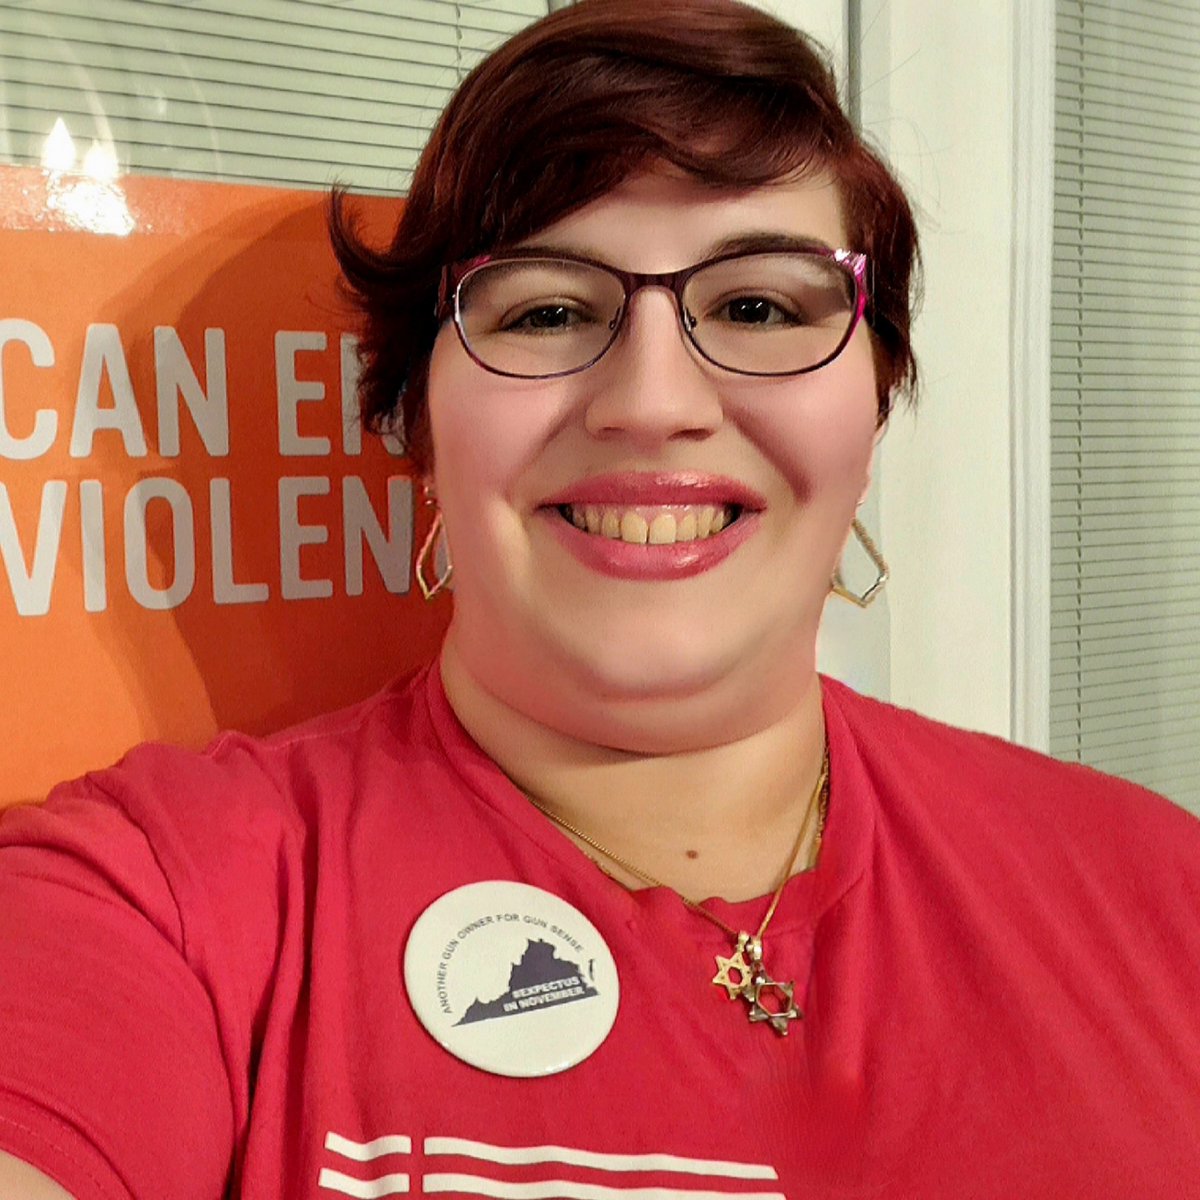 Welcome to the 118th Congress, @MarkWarner and @timkaine! 

As a gun owner, @MomsDemand volunteer, & @Everytown gun violence survivor in Virginia, I’ll be focused on the fight to #EndGunViolence in our communities, and I know Gun Sense Champions like you will too. #VAleg #VAGov